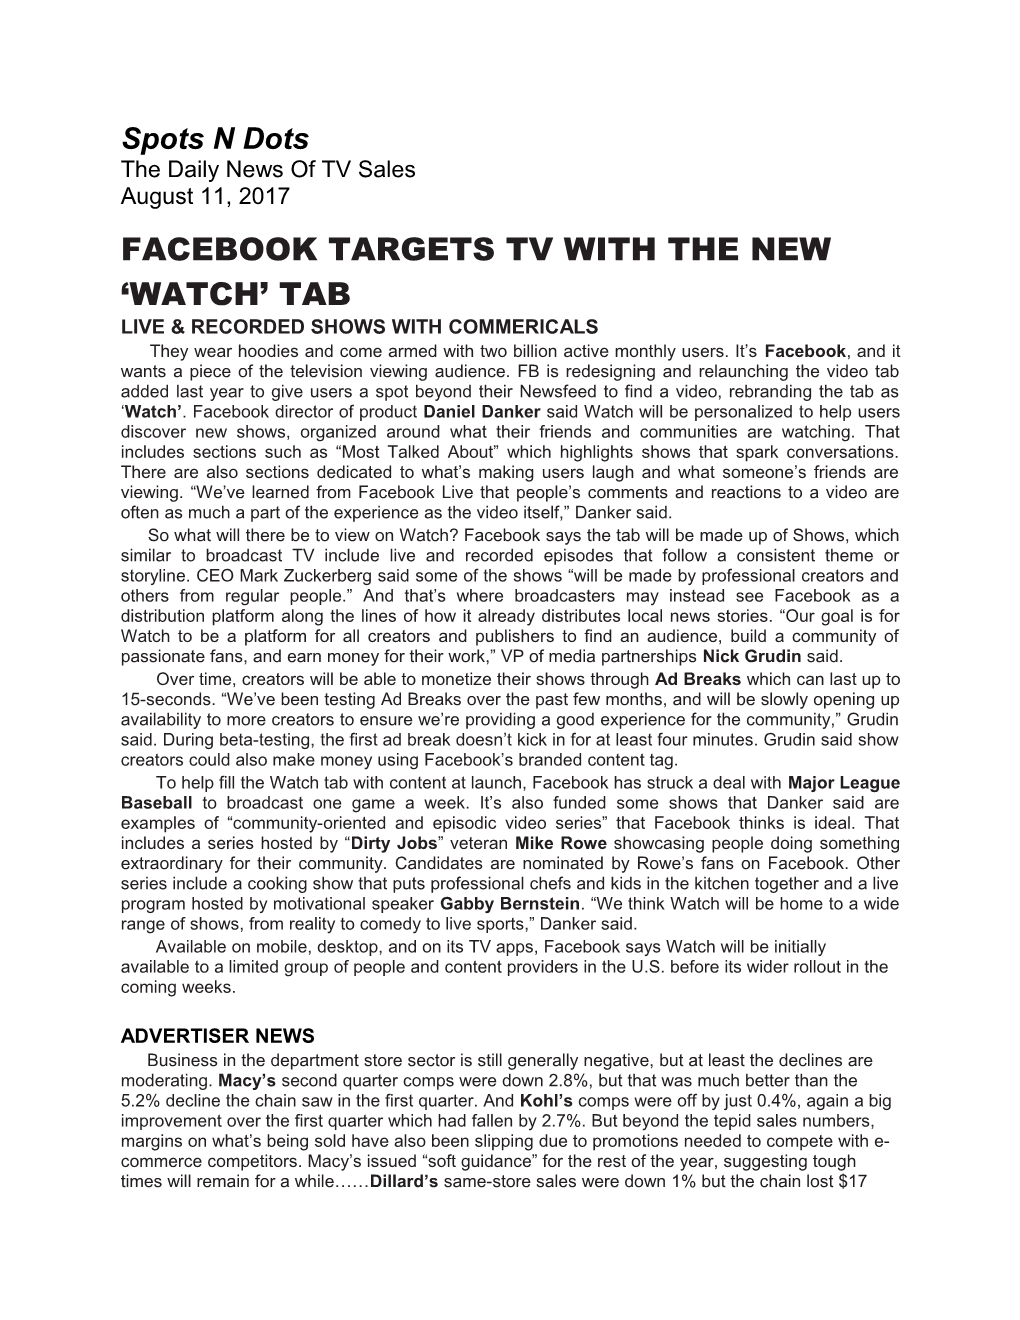 Facebook Targets Tv with the New Watch Tab